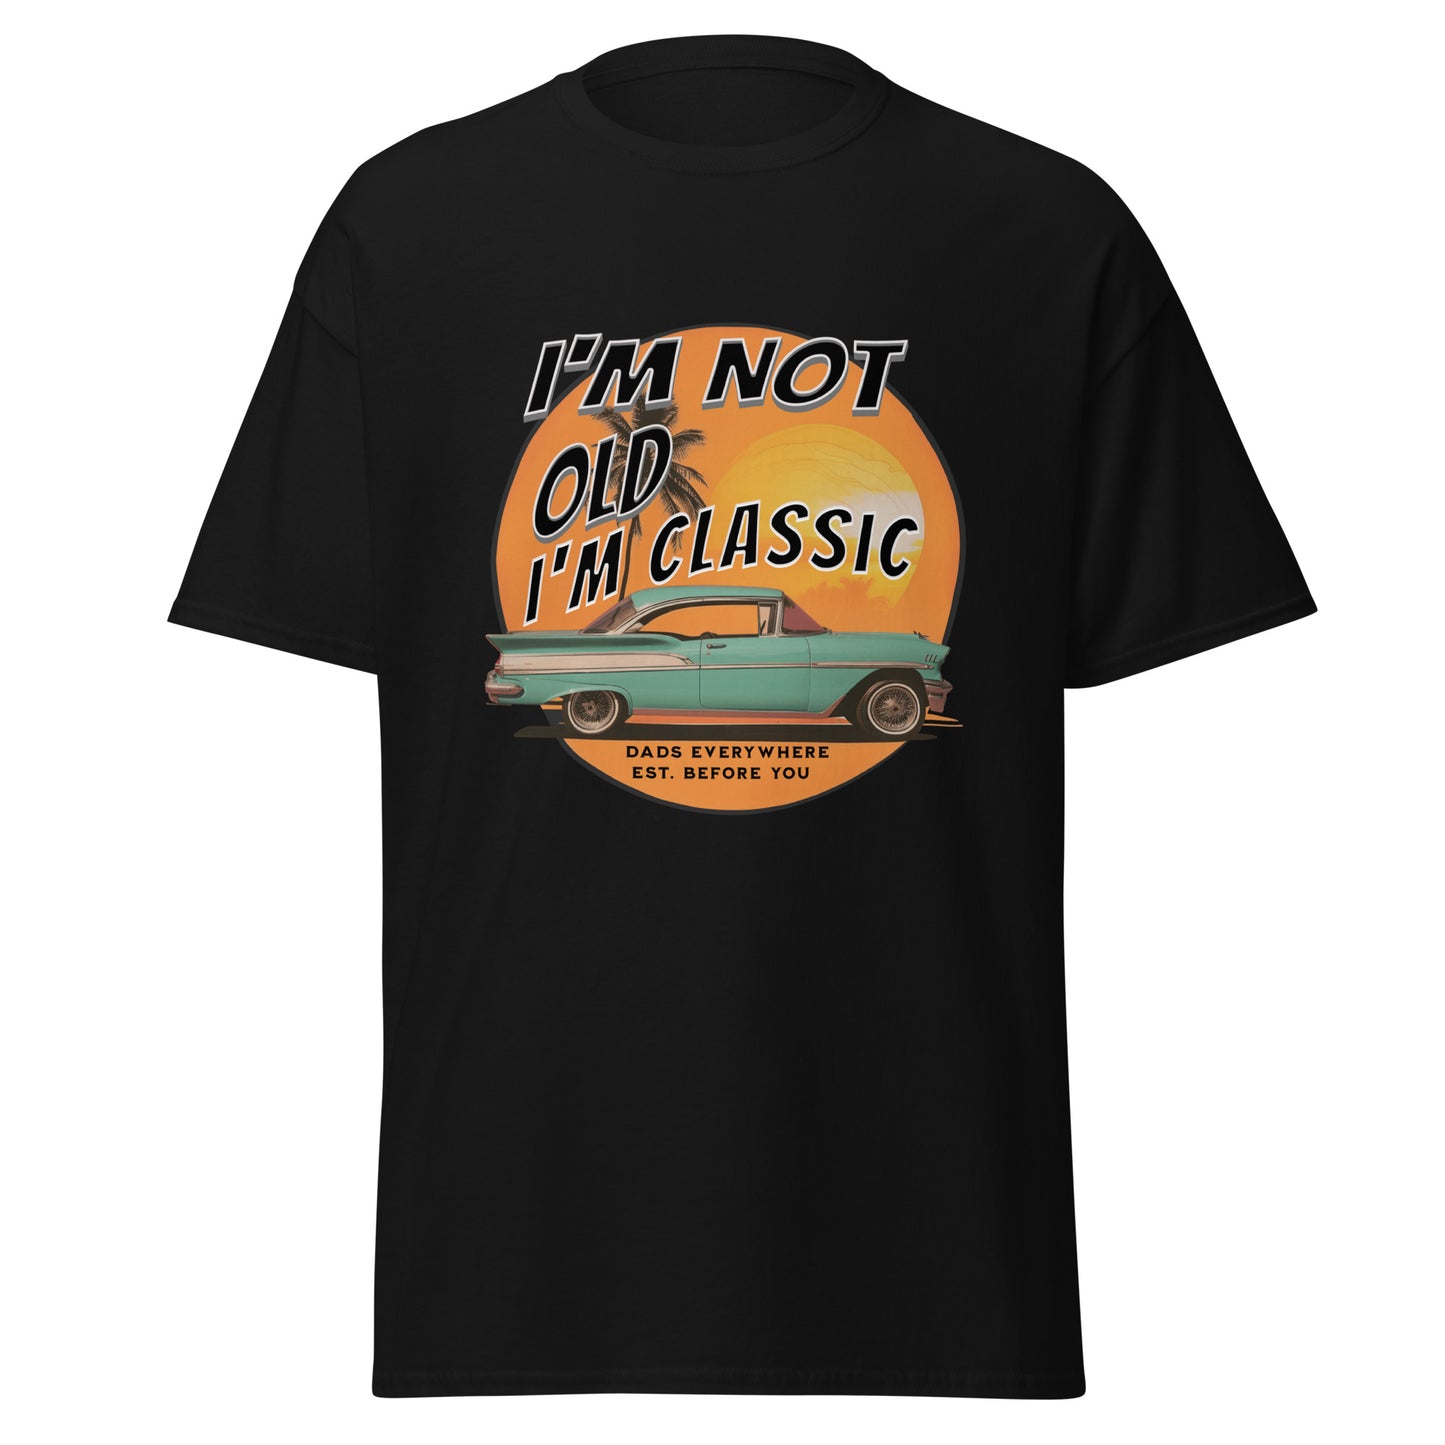 Classic Dad Humor Tee - 'I'm Not Old, I'm Classic'